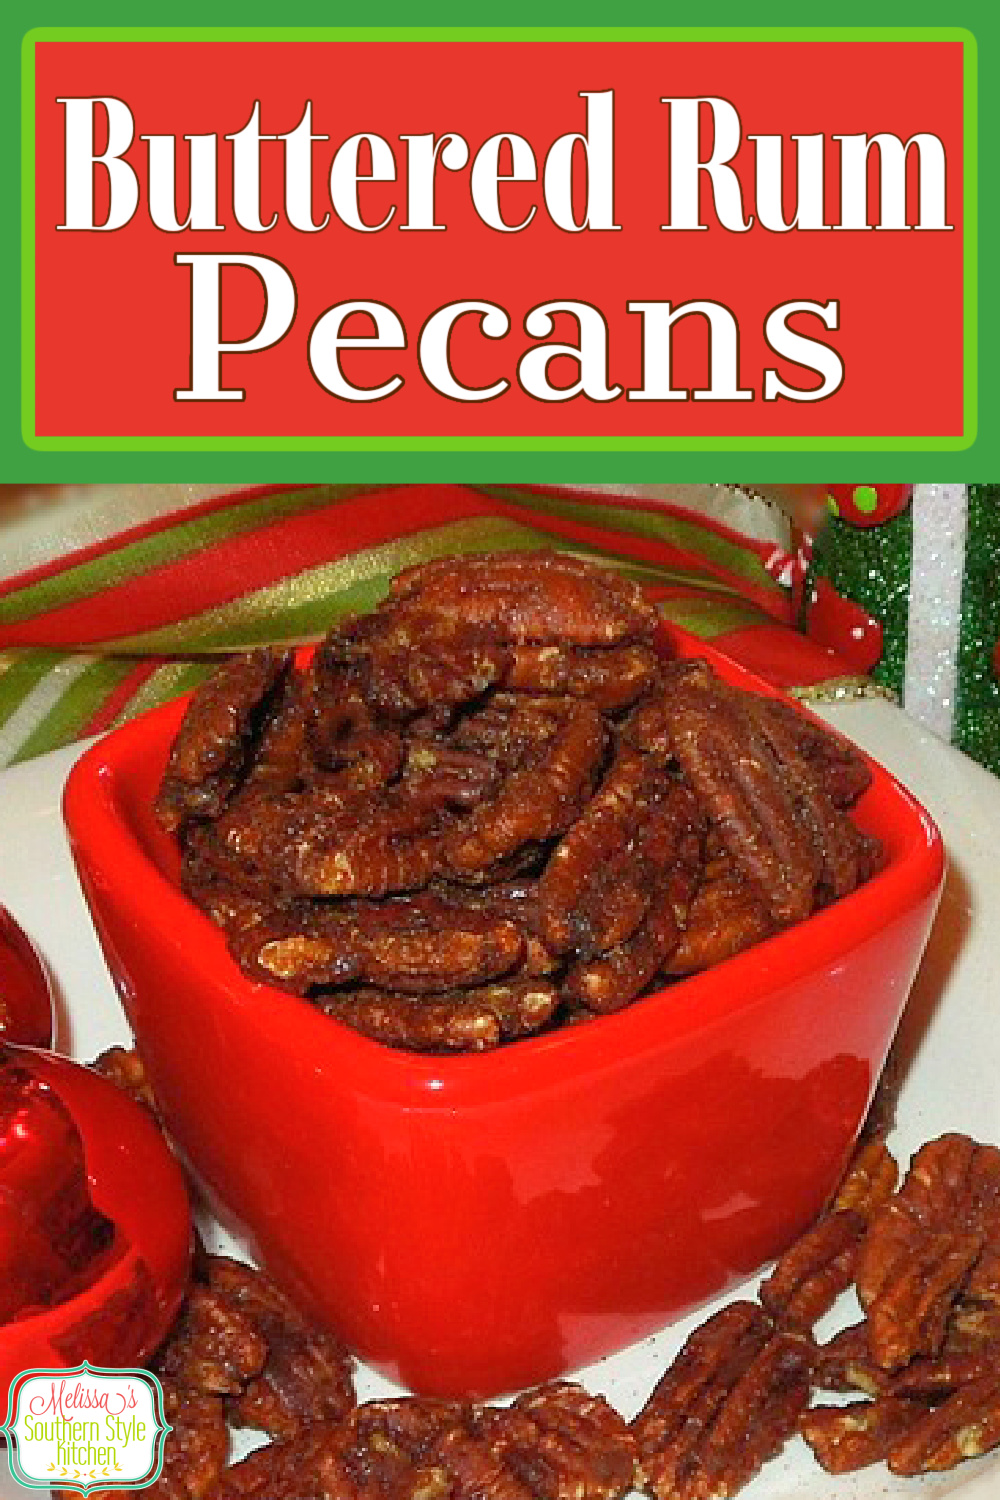 Spicy Buttered Rum Pecans #candiedpecans #butteredrumpecans #rum #butteredrum #snacks #candiedpecanrecipes #holidayrecipes #chrismtas #candiednuts #sweets #desserts #dessertfoodrecipes #holidaybaking #homeadegifts #southernrecipes #southernfood #melissassouthernstylekitchen via @melissasssk